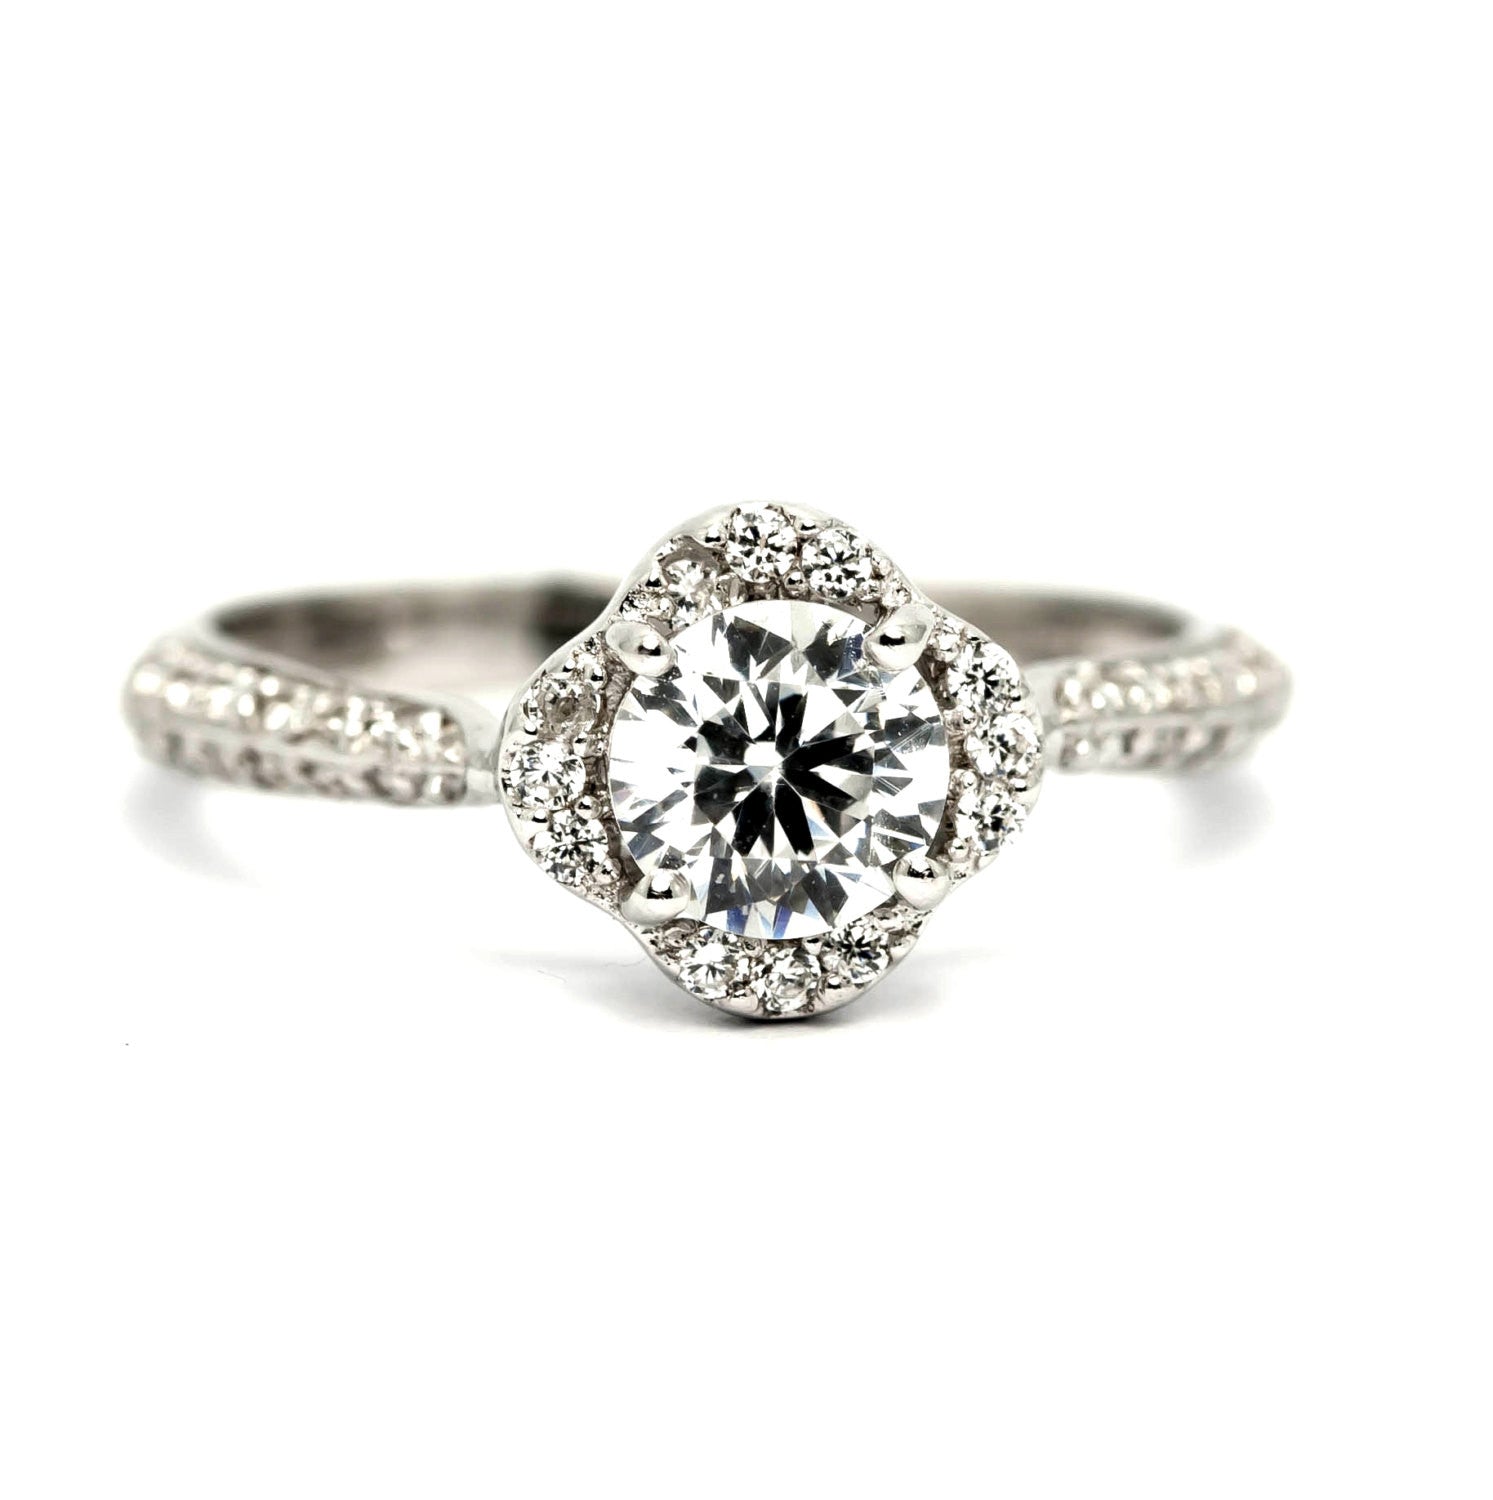 Unique Semi Mount Floating Halo For 1 Carat Center Stone Engagement Ring, 14k Gold, .35 carat of Diamonds - Y11652